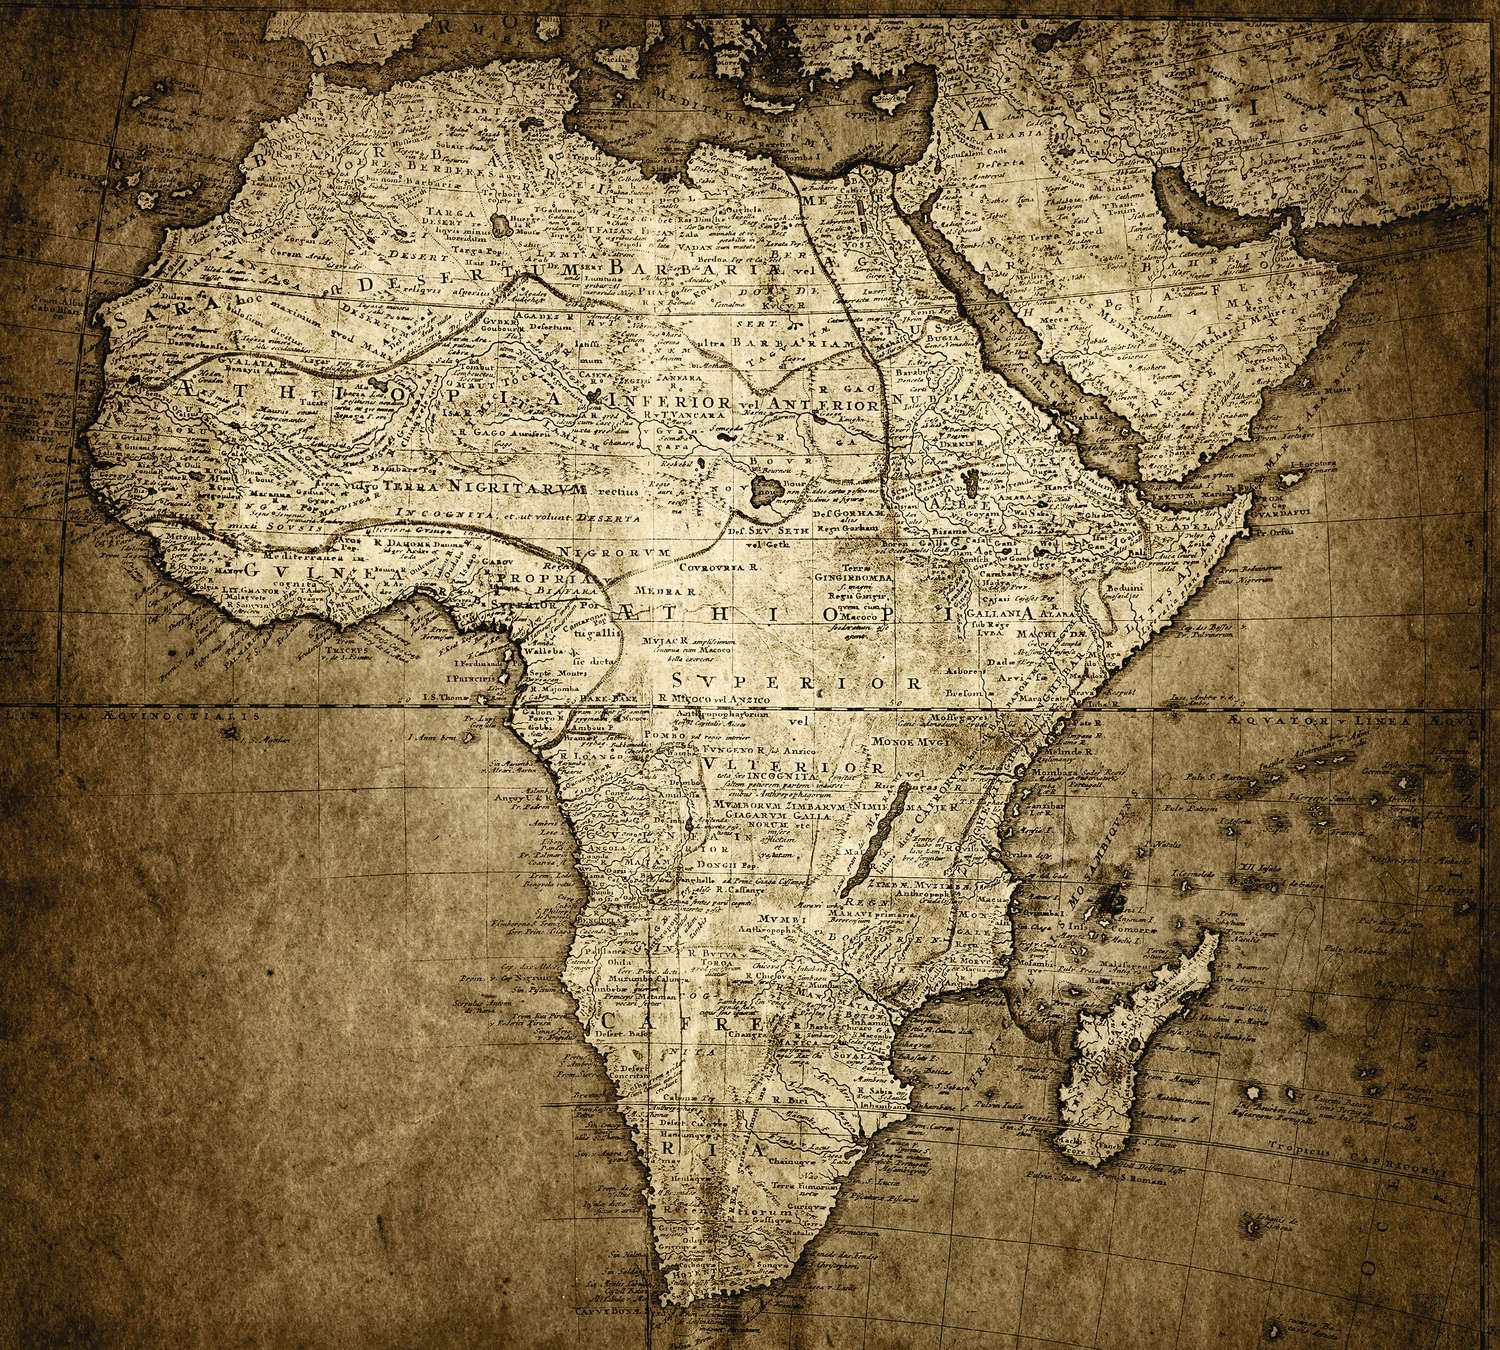             Vintage style Africa map mural
        